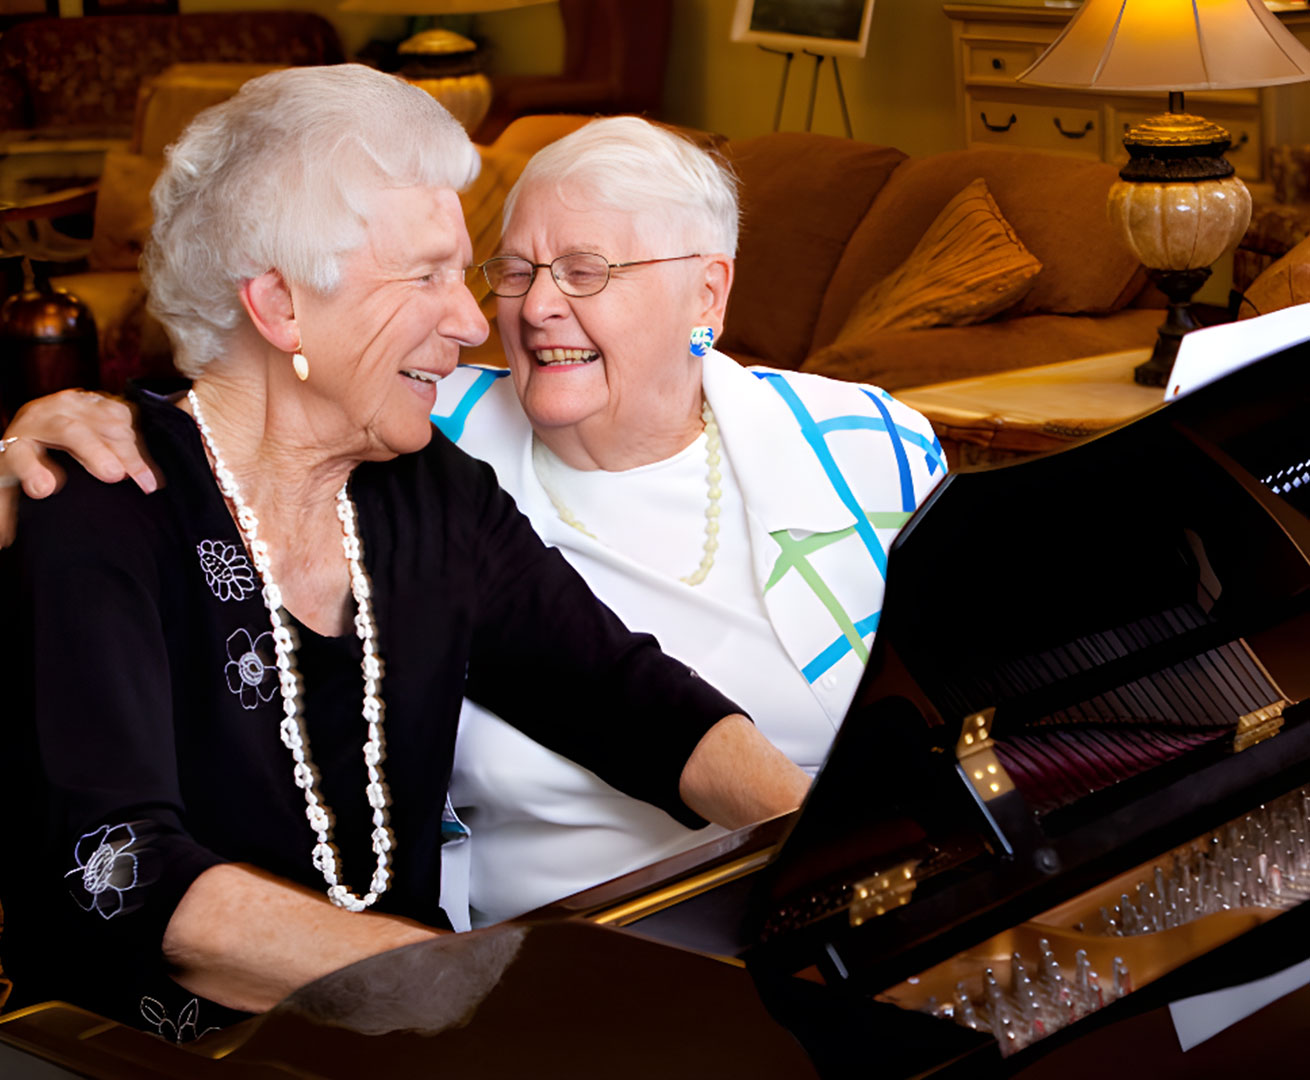 Northwood Retirement Resort residents playing piano together